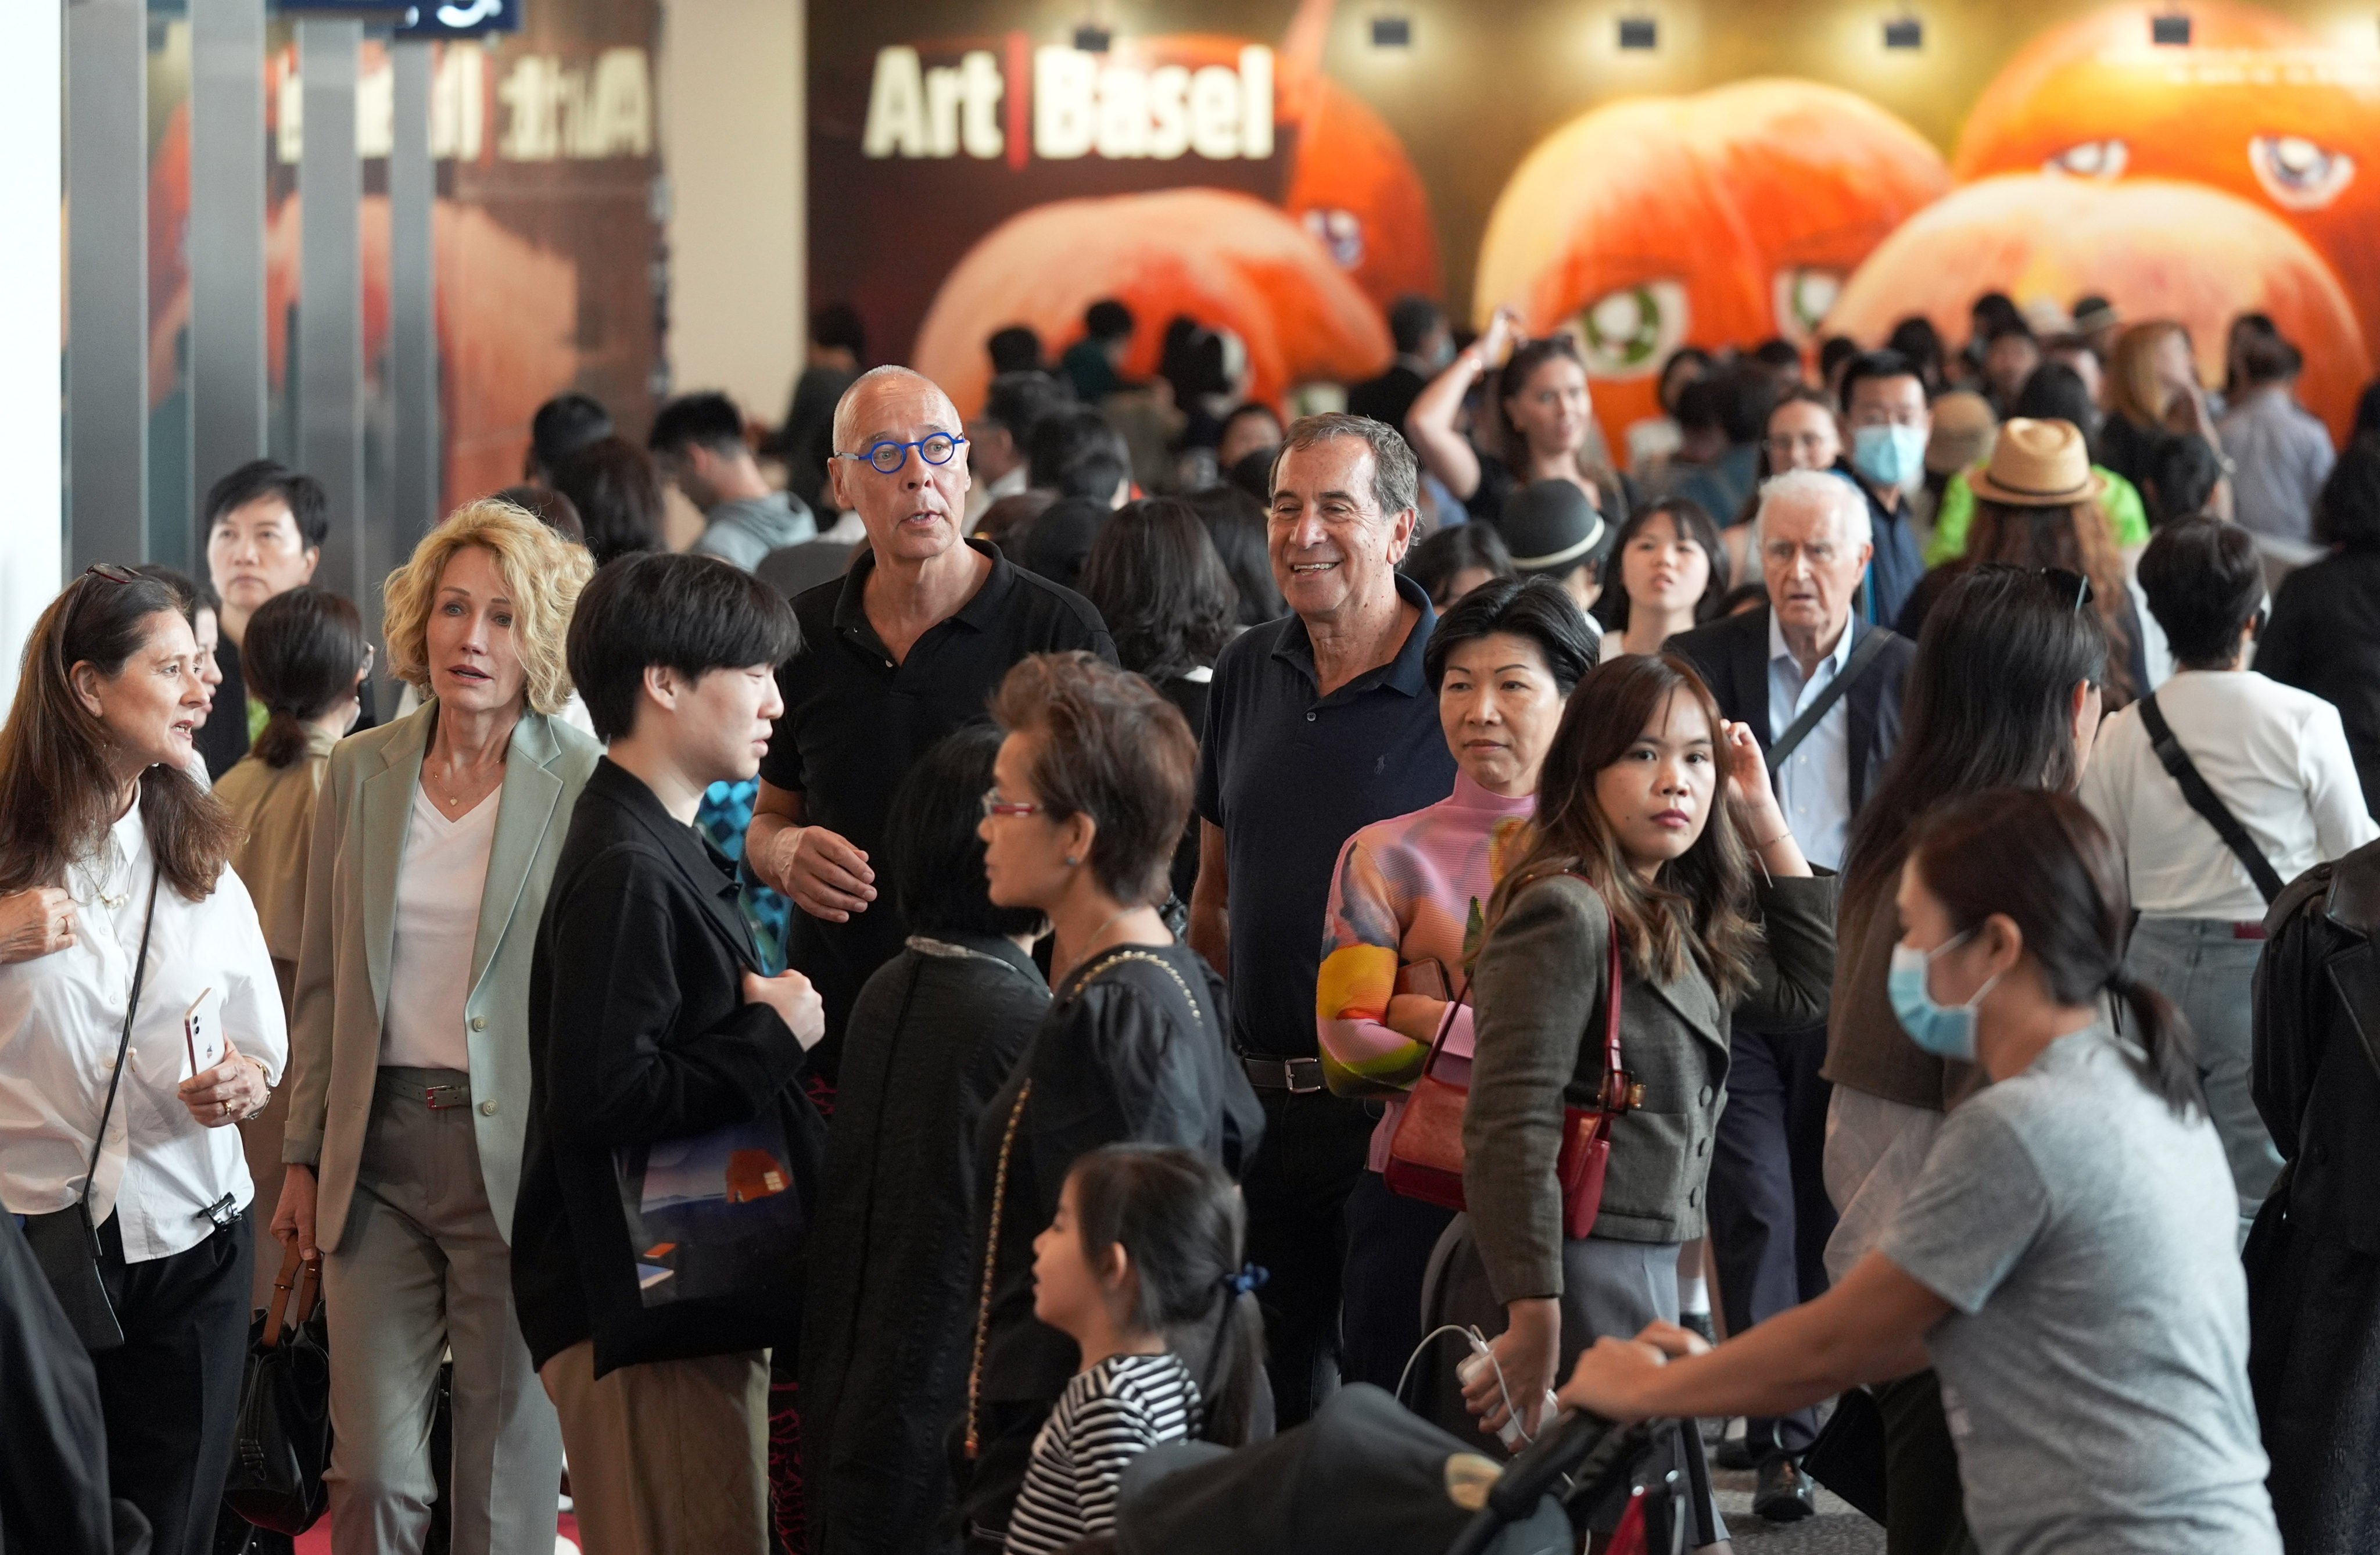 It was a busy week in Hong Kong, with events including Art Basel at the Hong Kong Convention and Exhibition Centre in Wan Chai attracting visitors late last month. Photo: Eugene Lee